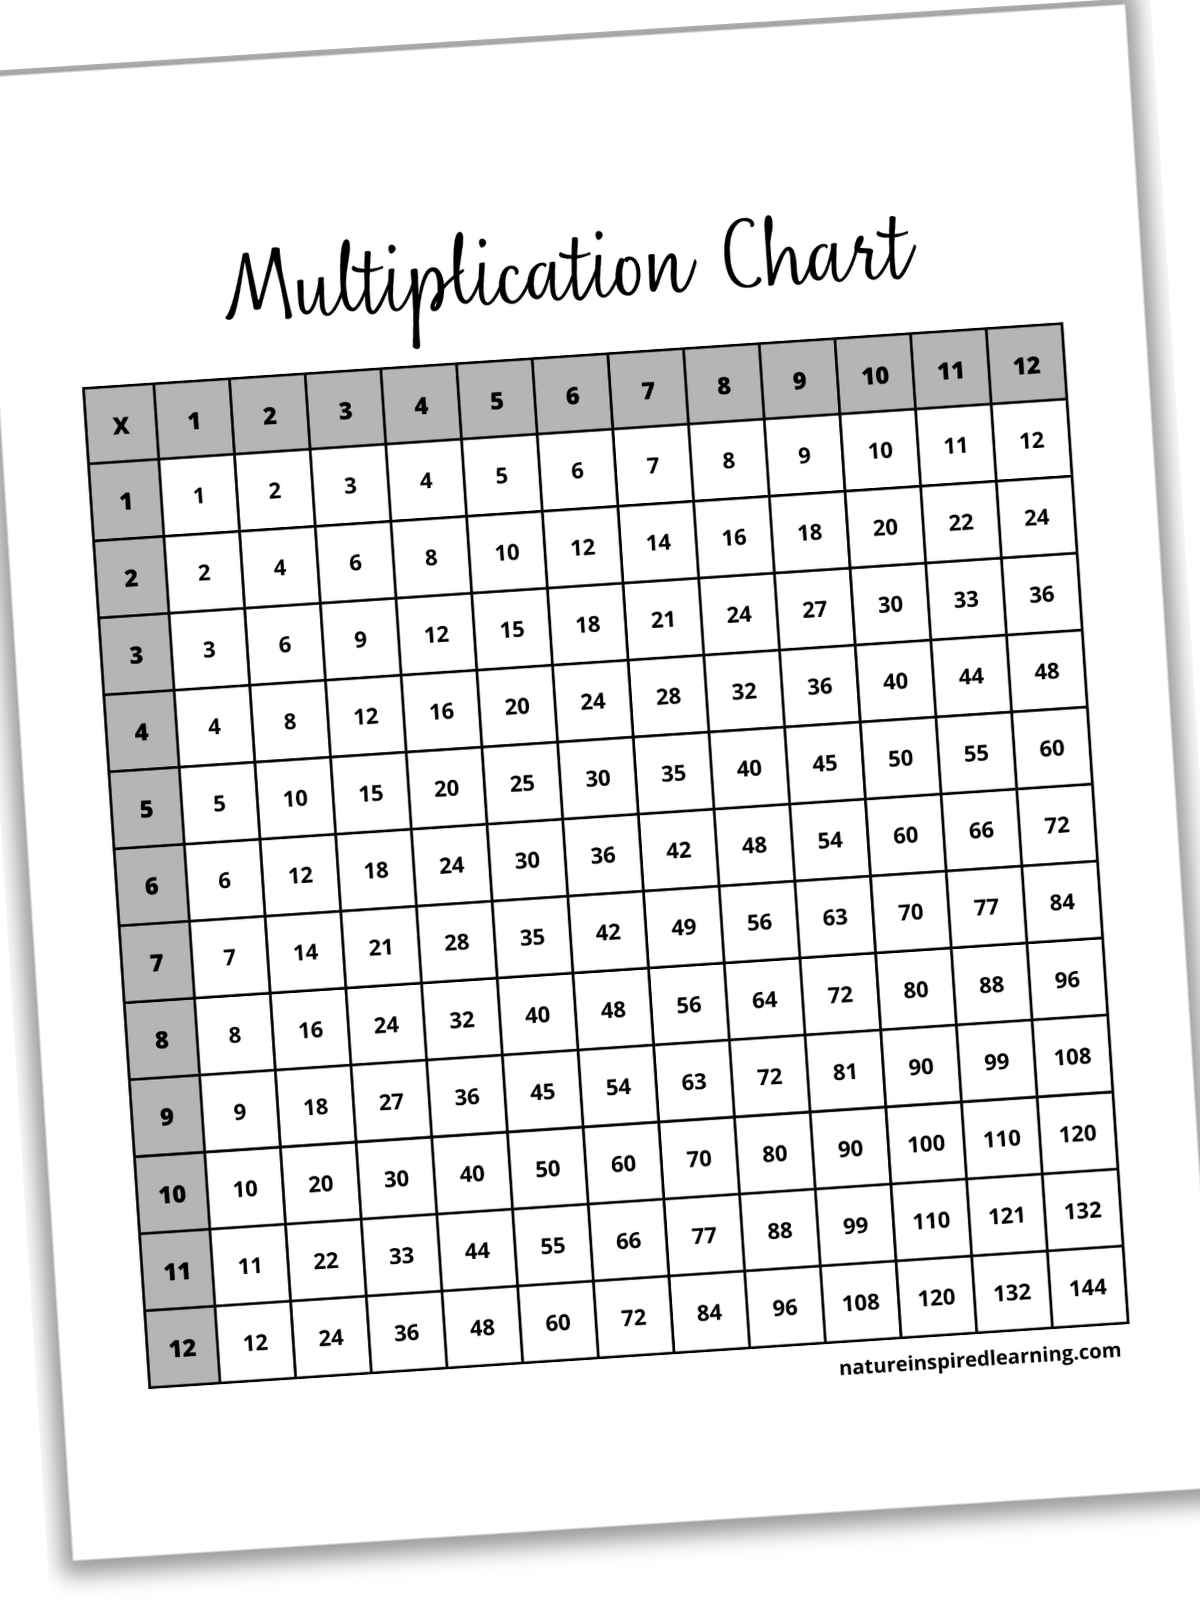 black and white printable multiplication chart with cursive across the top. Gray number boxes across the top and down the left side. White boxes with black numbers within the chart